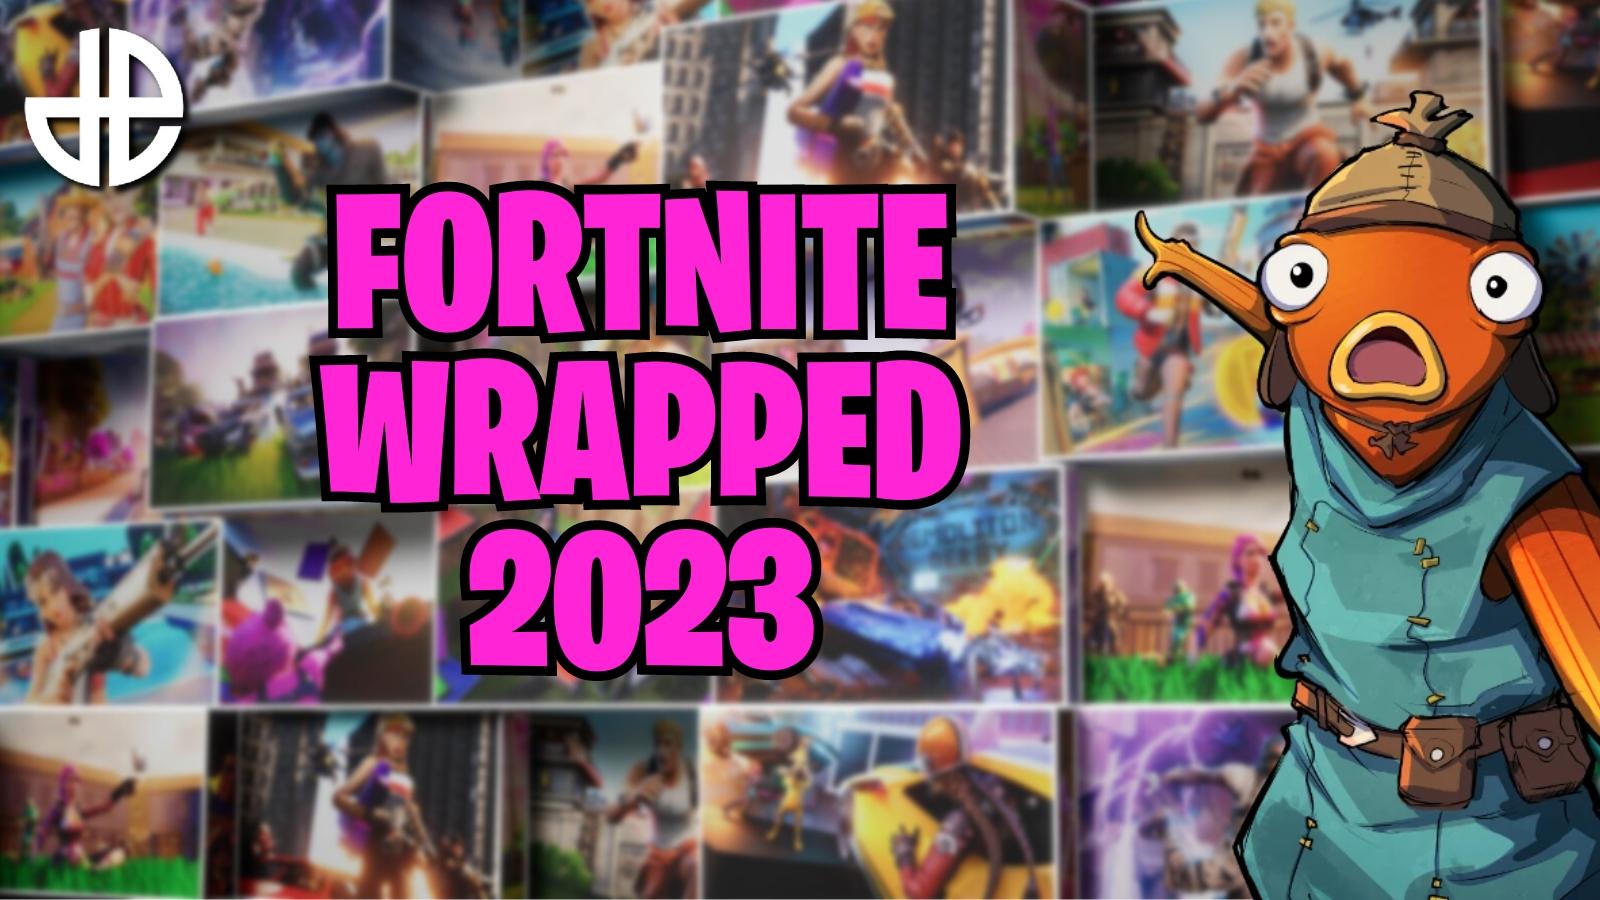 How to get your Fortnite Wrapped 2023 Dexerto